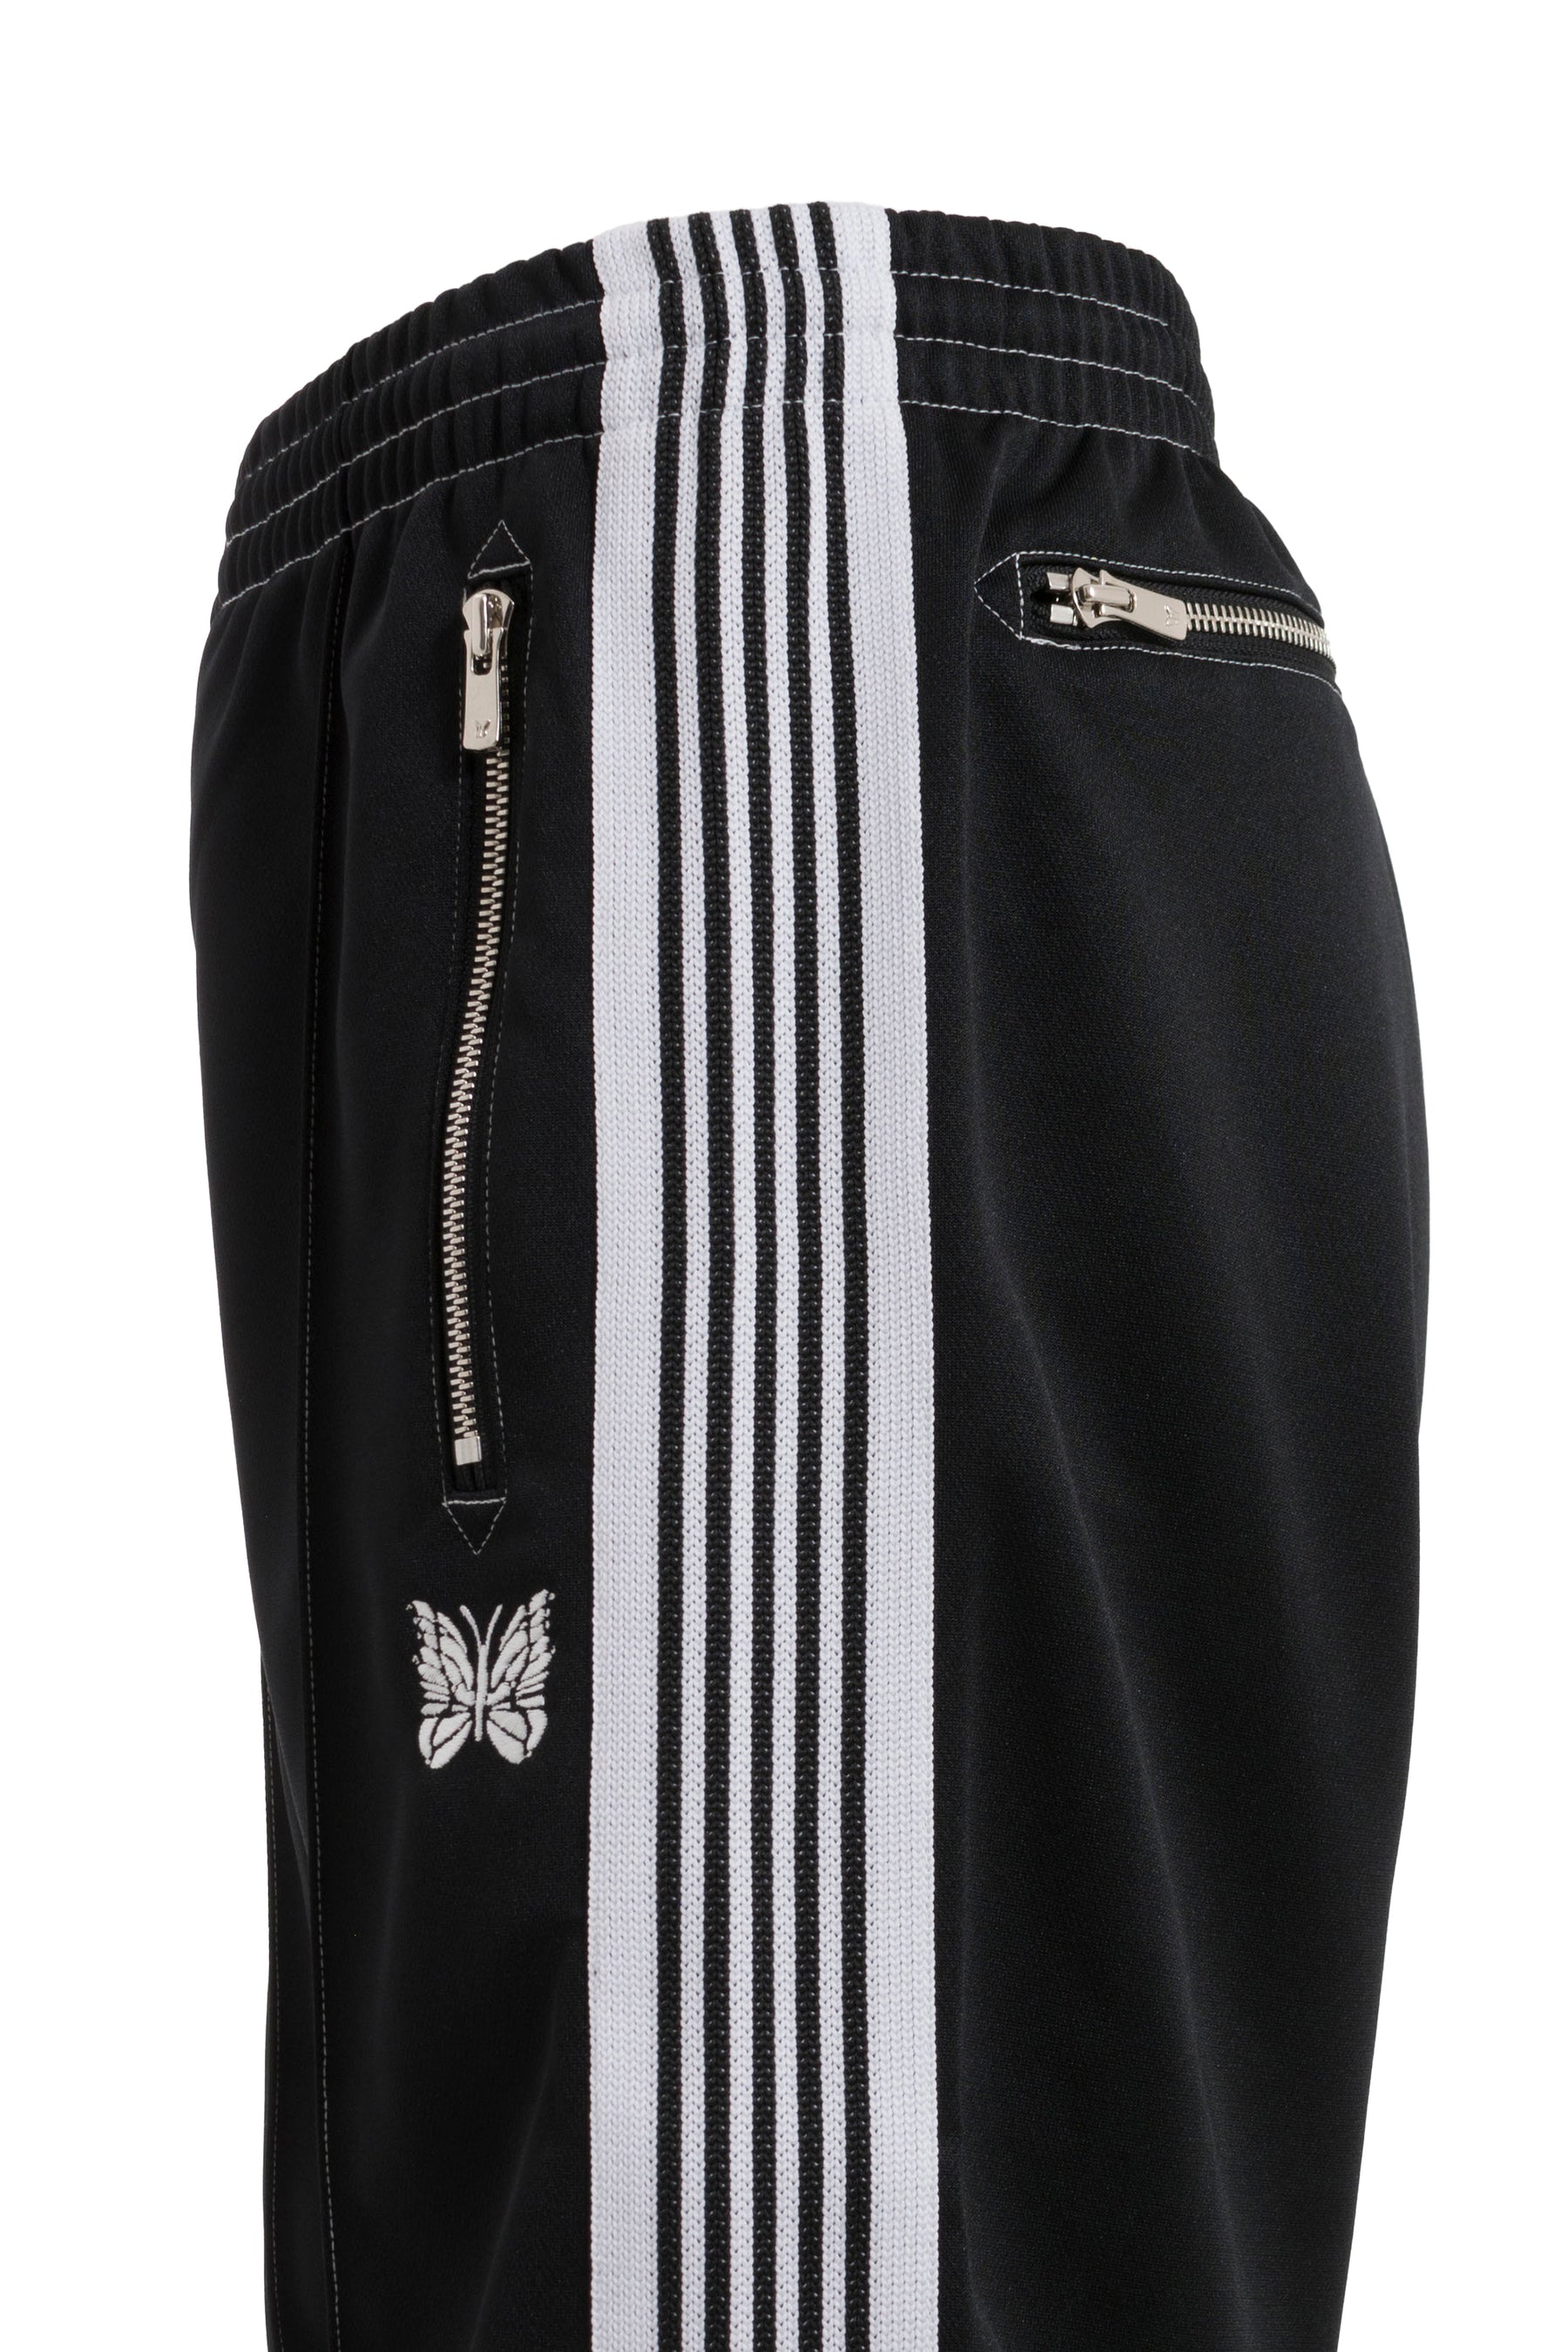 Needles SS23 TRACK SHORTS - POLY SMOOTH(EXCLUSIVE) / BLK WHT -NUBIAN